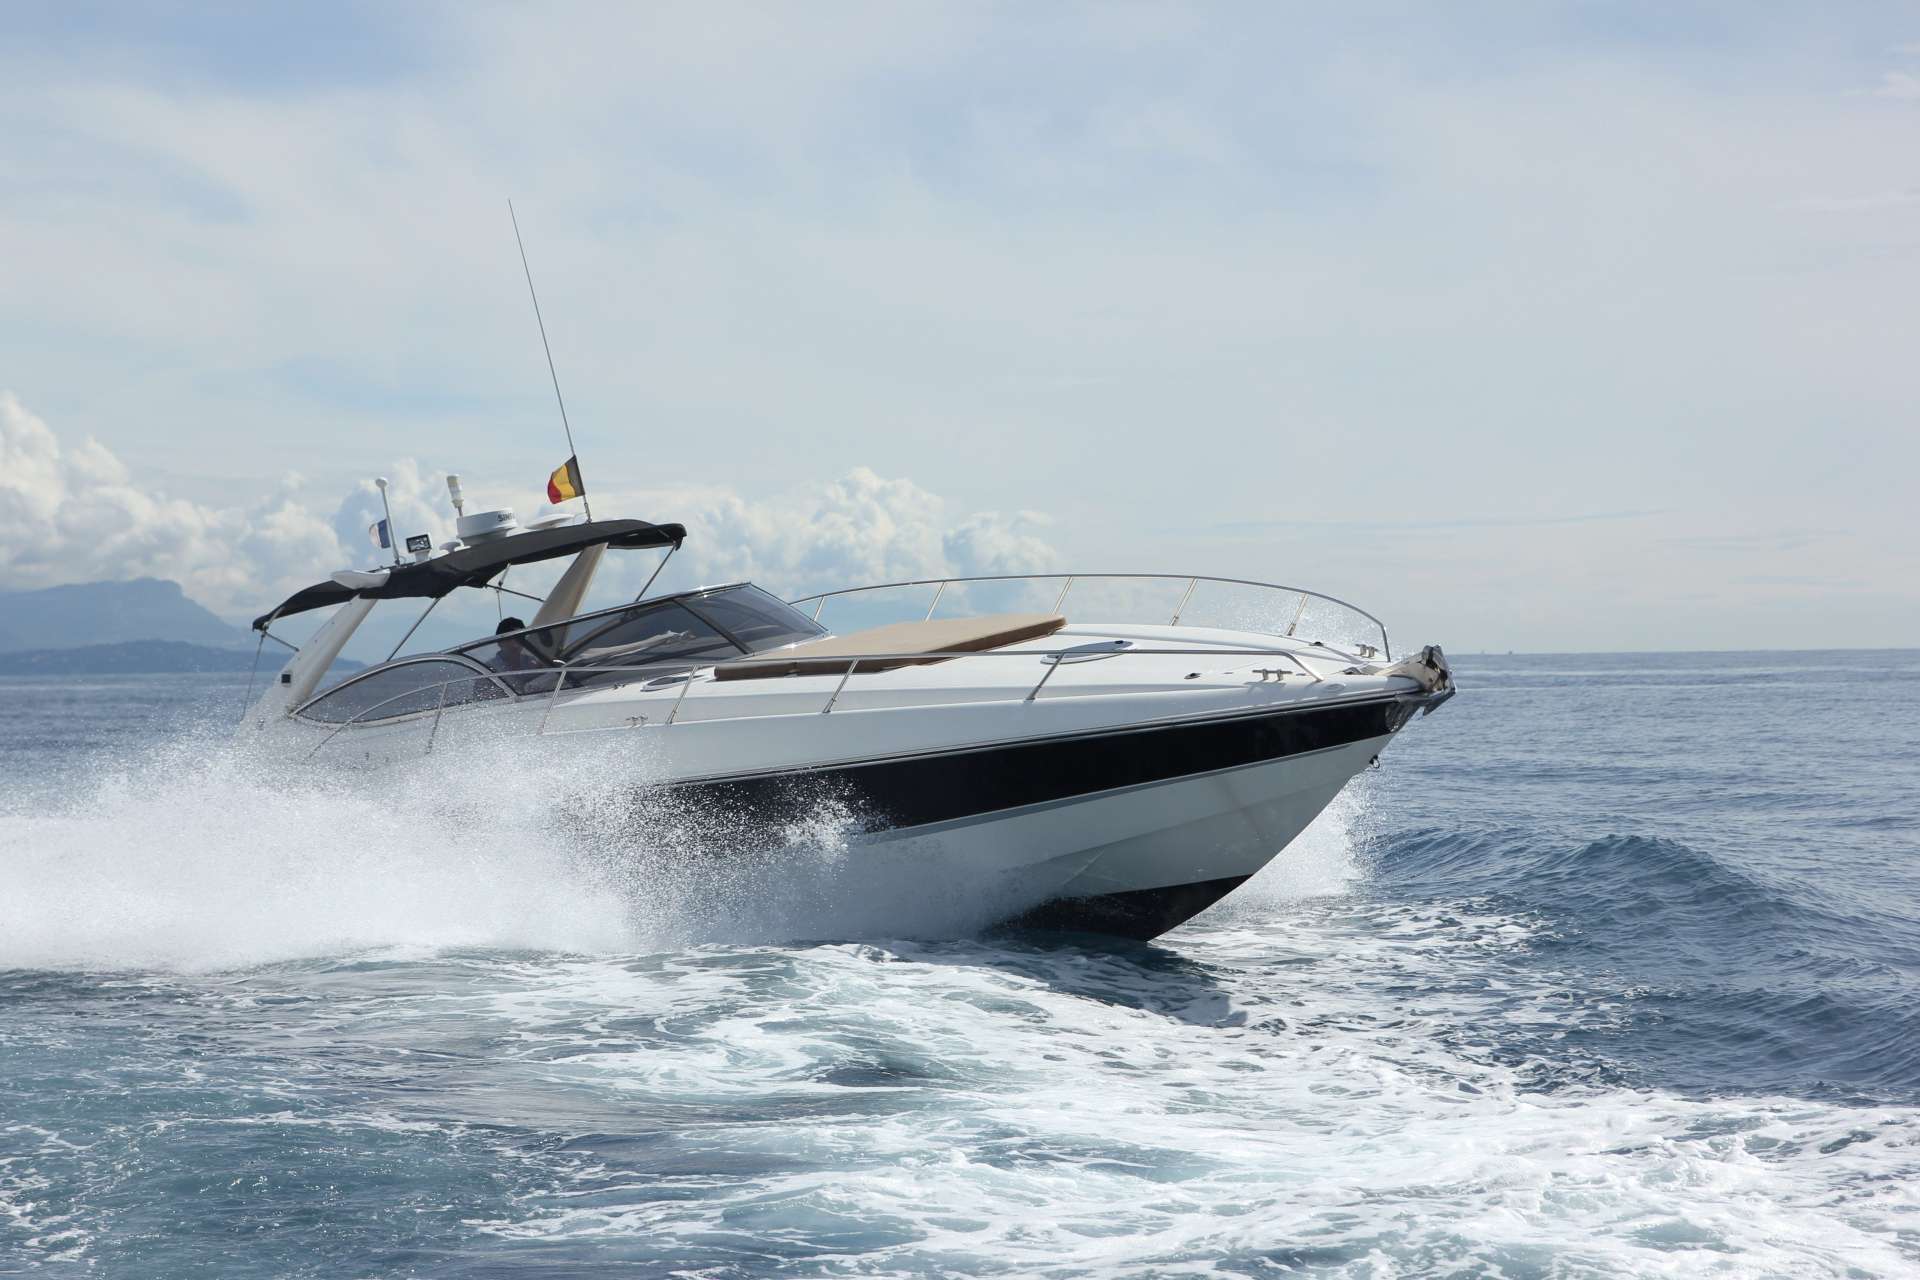 Sunseeker 48 - Motor Boat Charter France & Boat hire in France French Riviera Cannes Vieux port de Vallauris 6